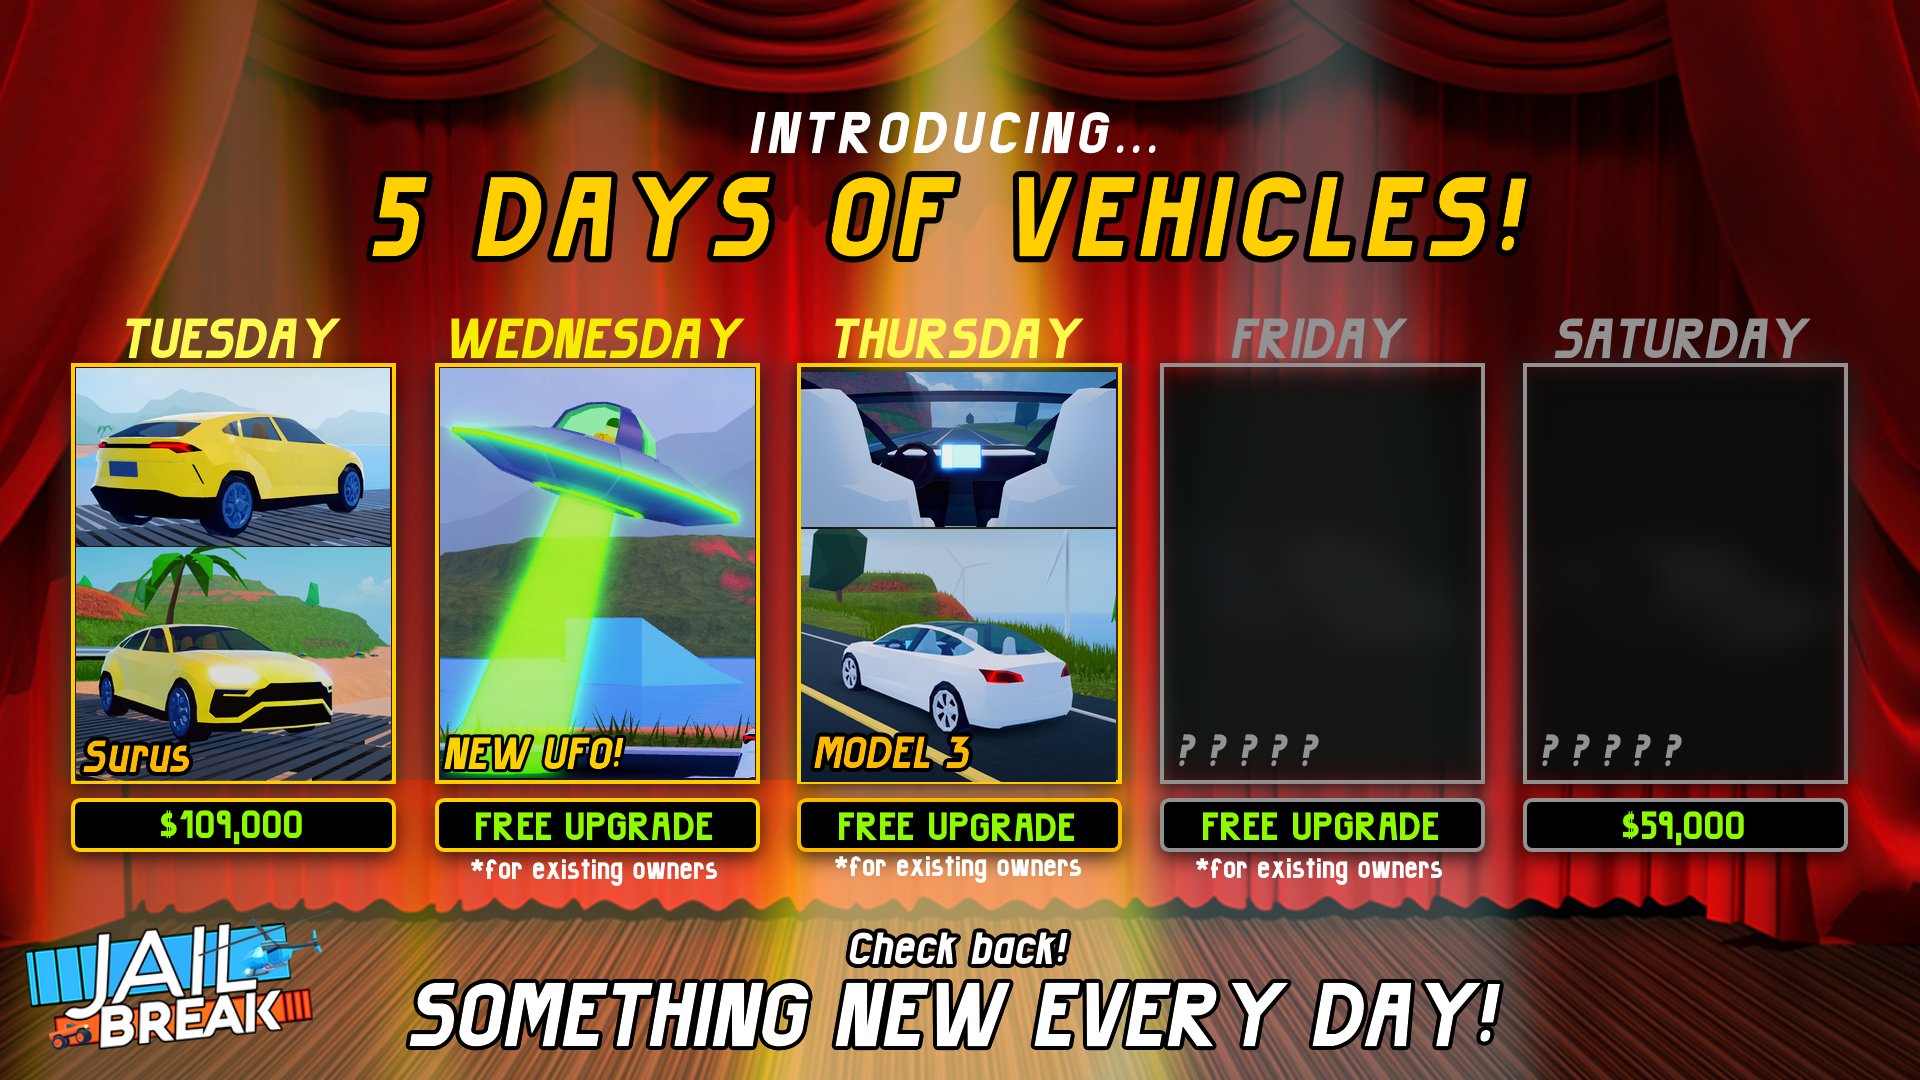 Badimo Jailbreak On Twitter 5 Days 5 Vehicles The 3rd New Vehicle Is Also A Refresh And It Is The Model 3 Featuring A Futuristic Spaceship Interior With A - roblox jailbreak new vehicles